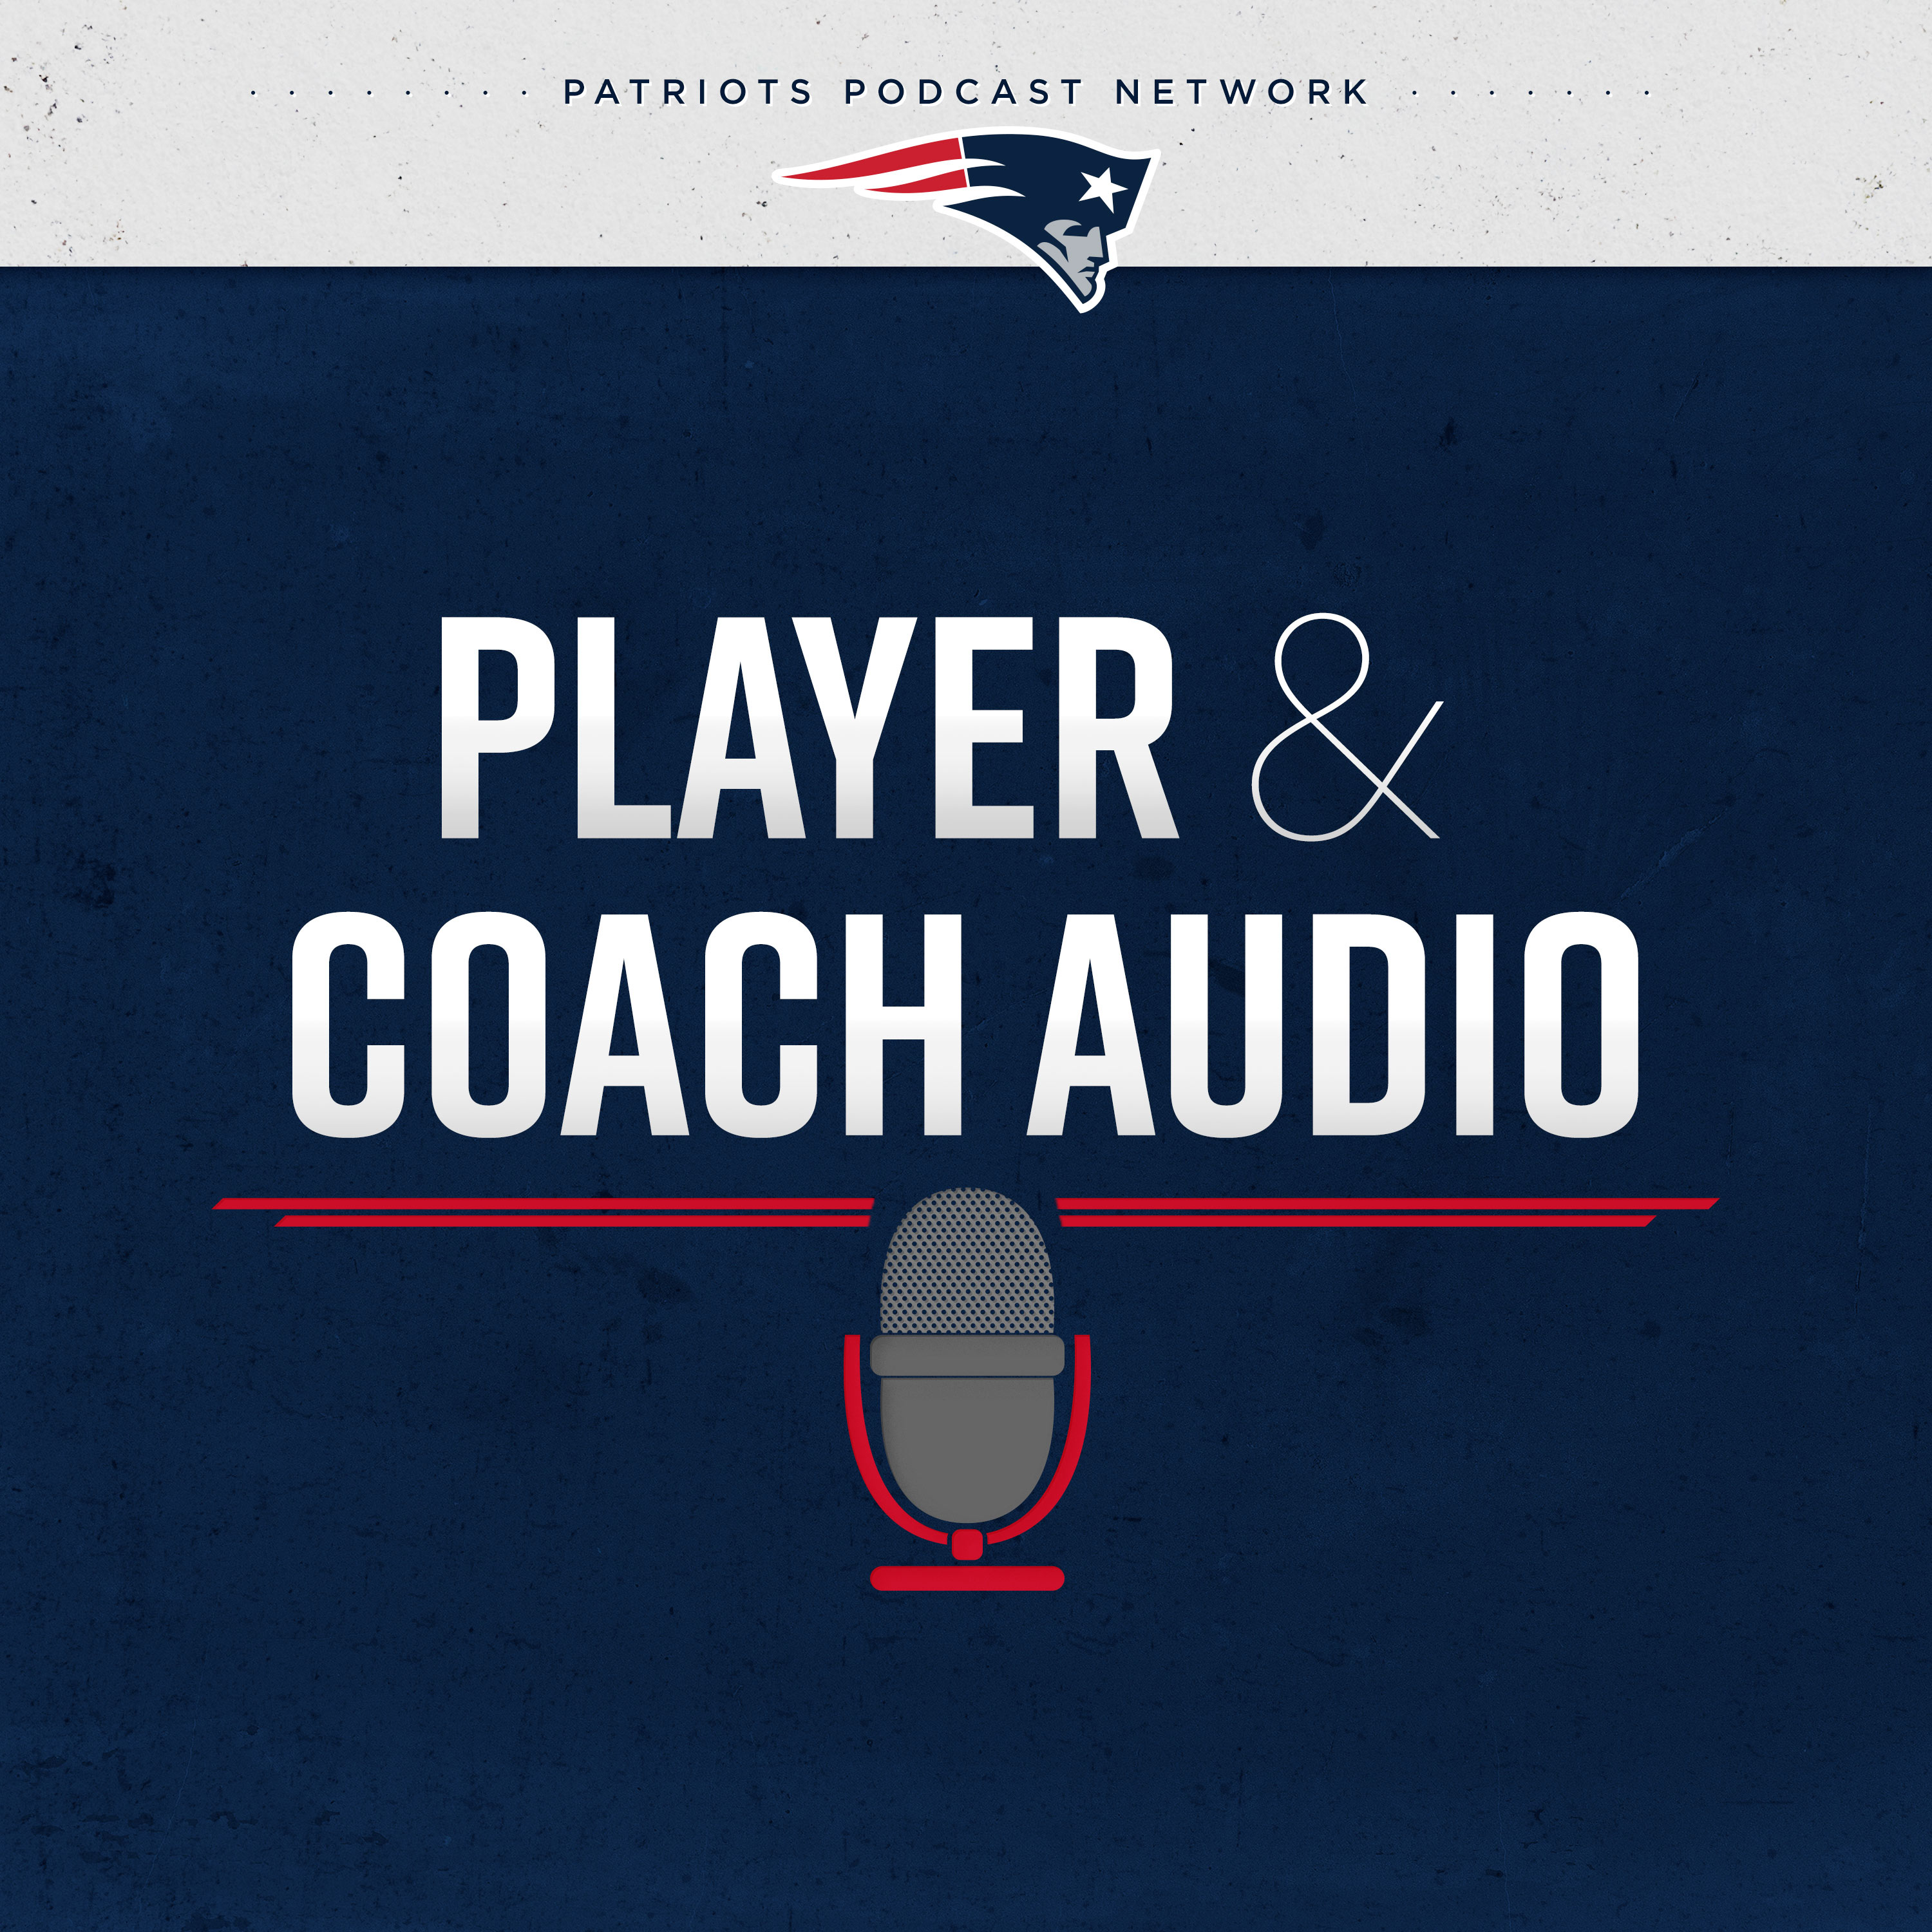 Bill Belichick 11/24: "They are a physical team in all three phases of the game"